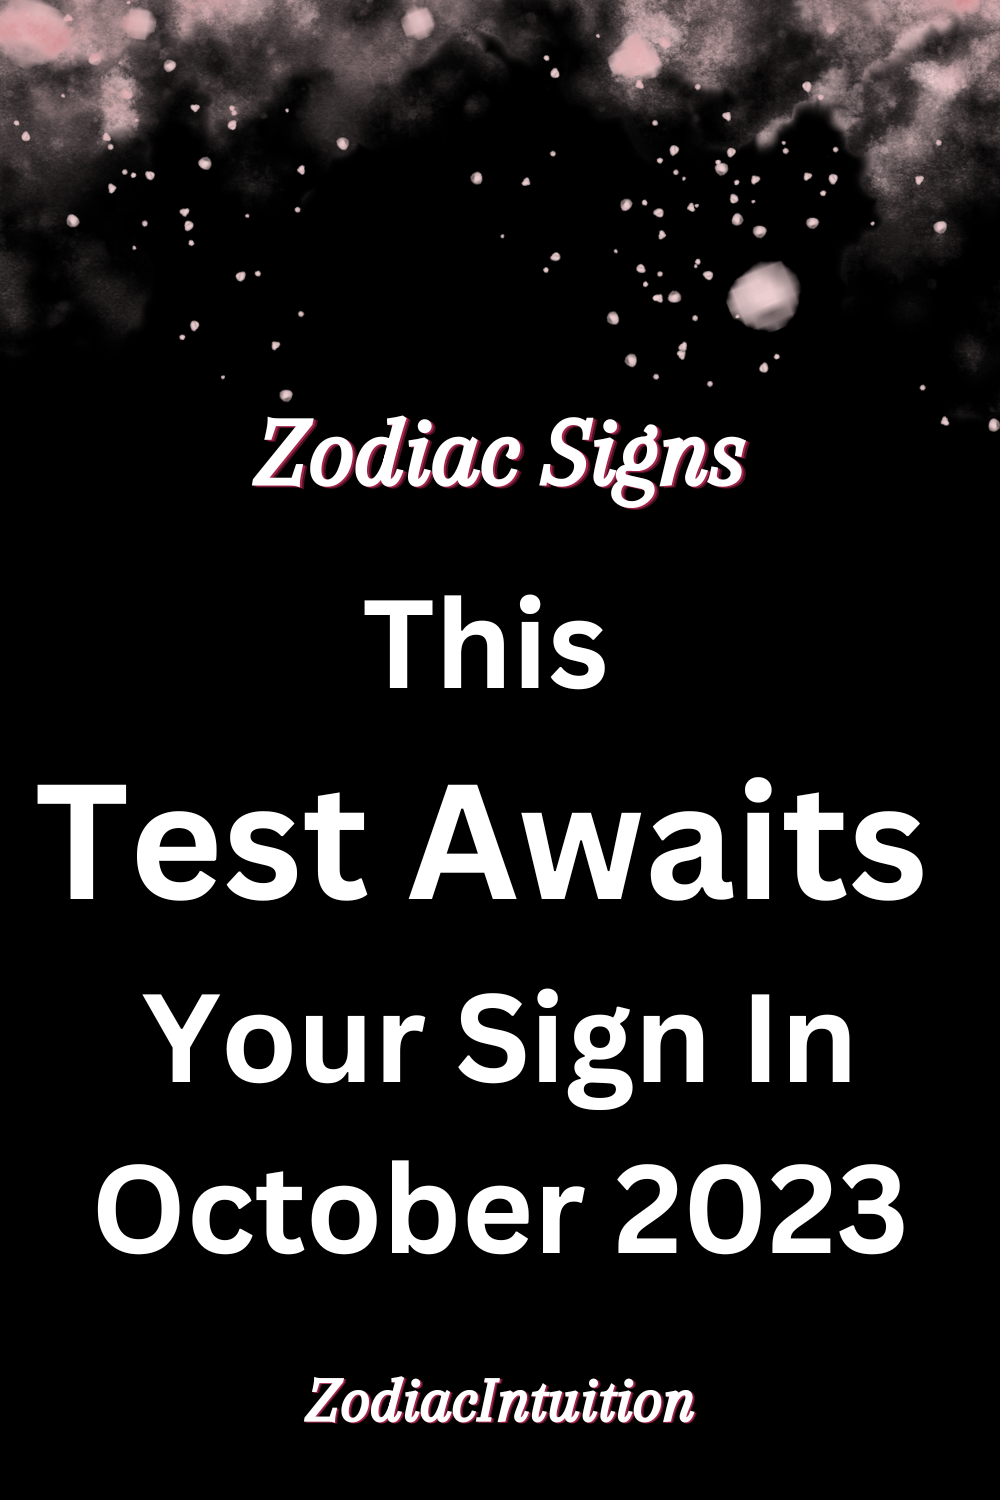 This Test Awaits Your Sign In October 2023